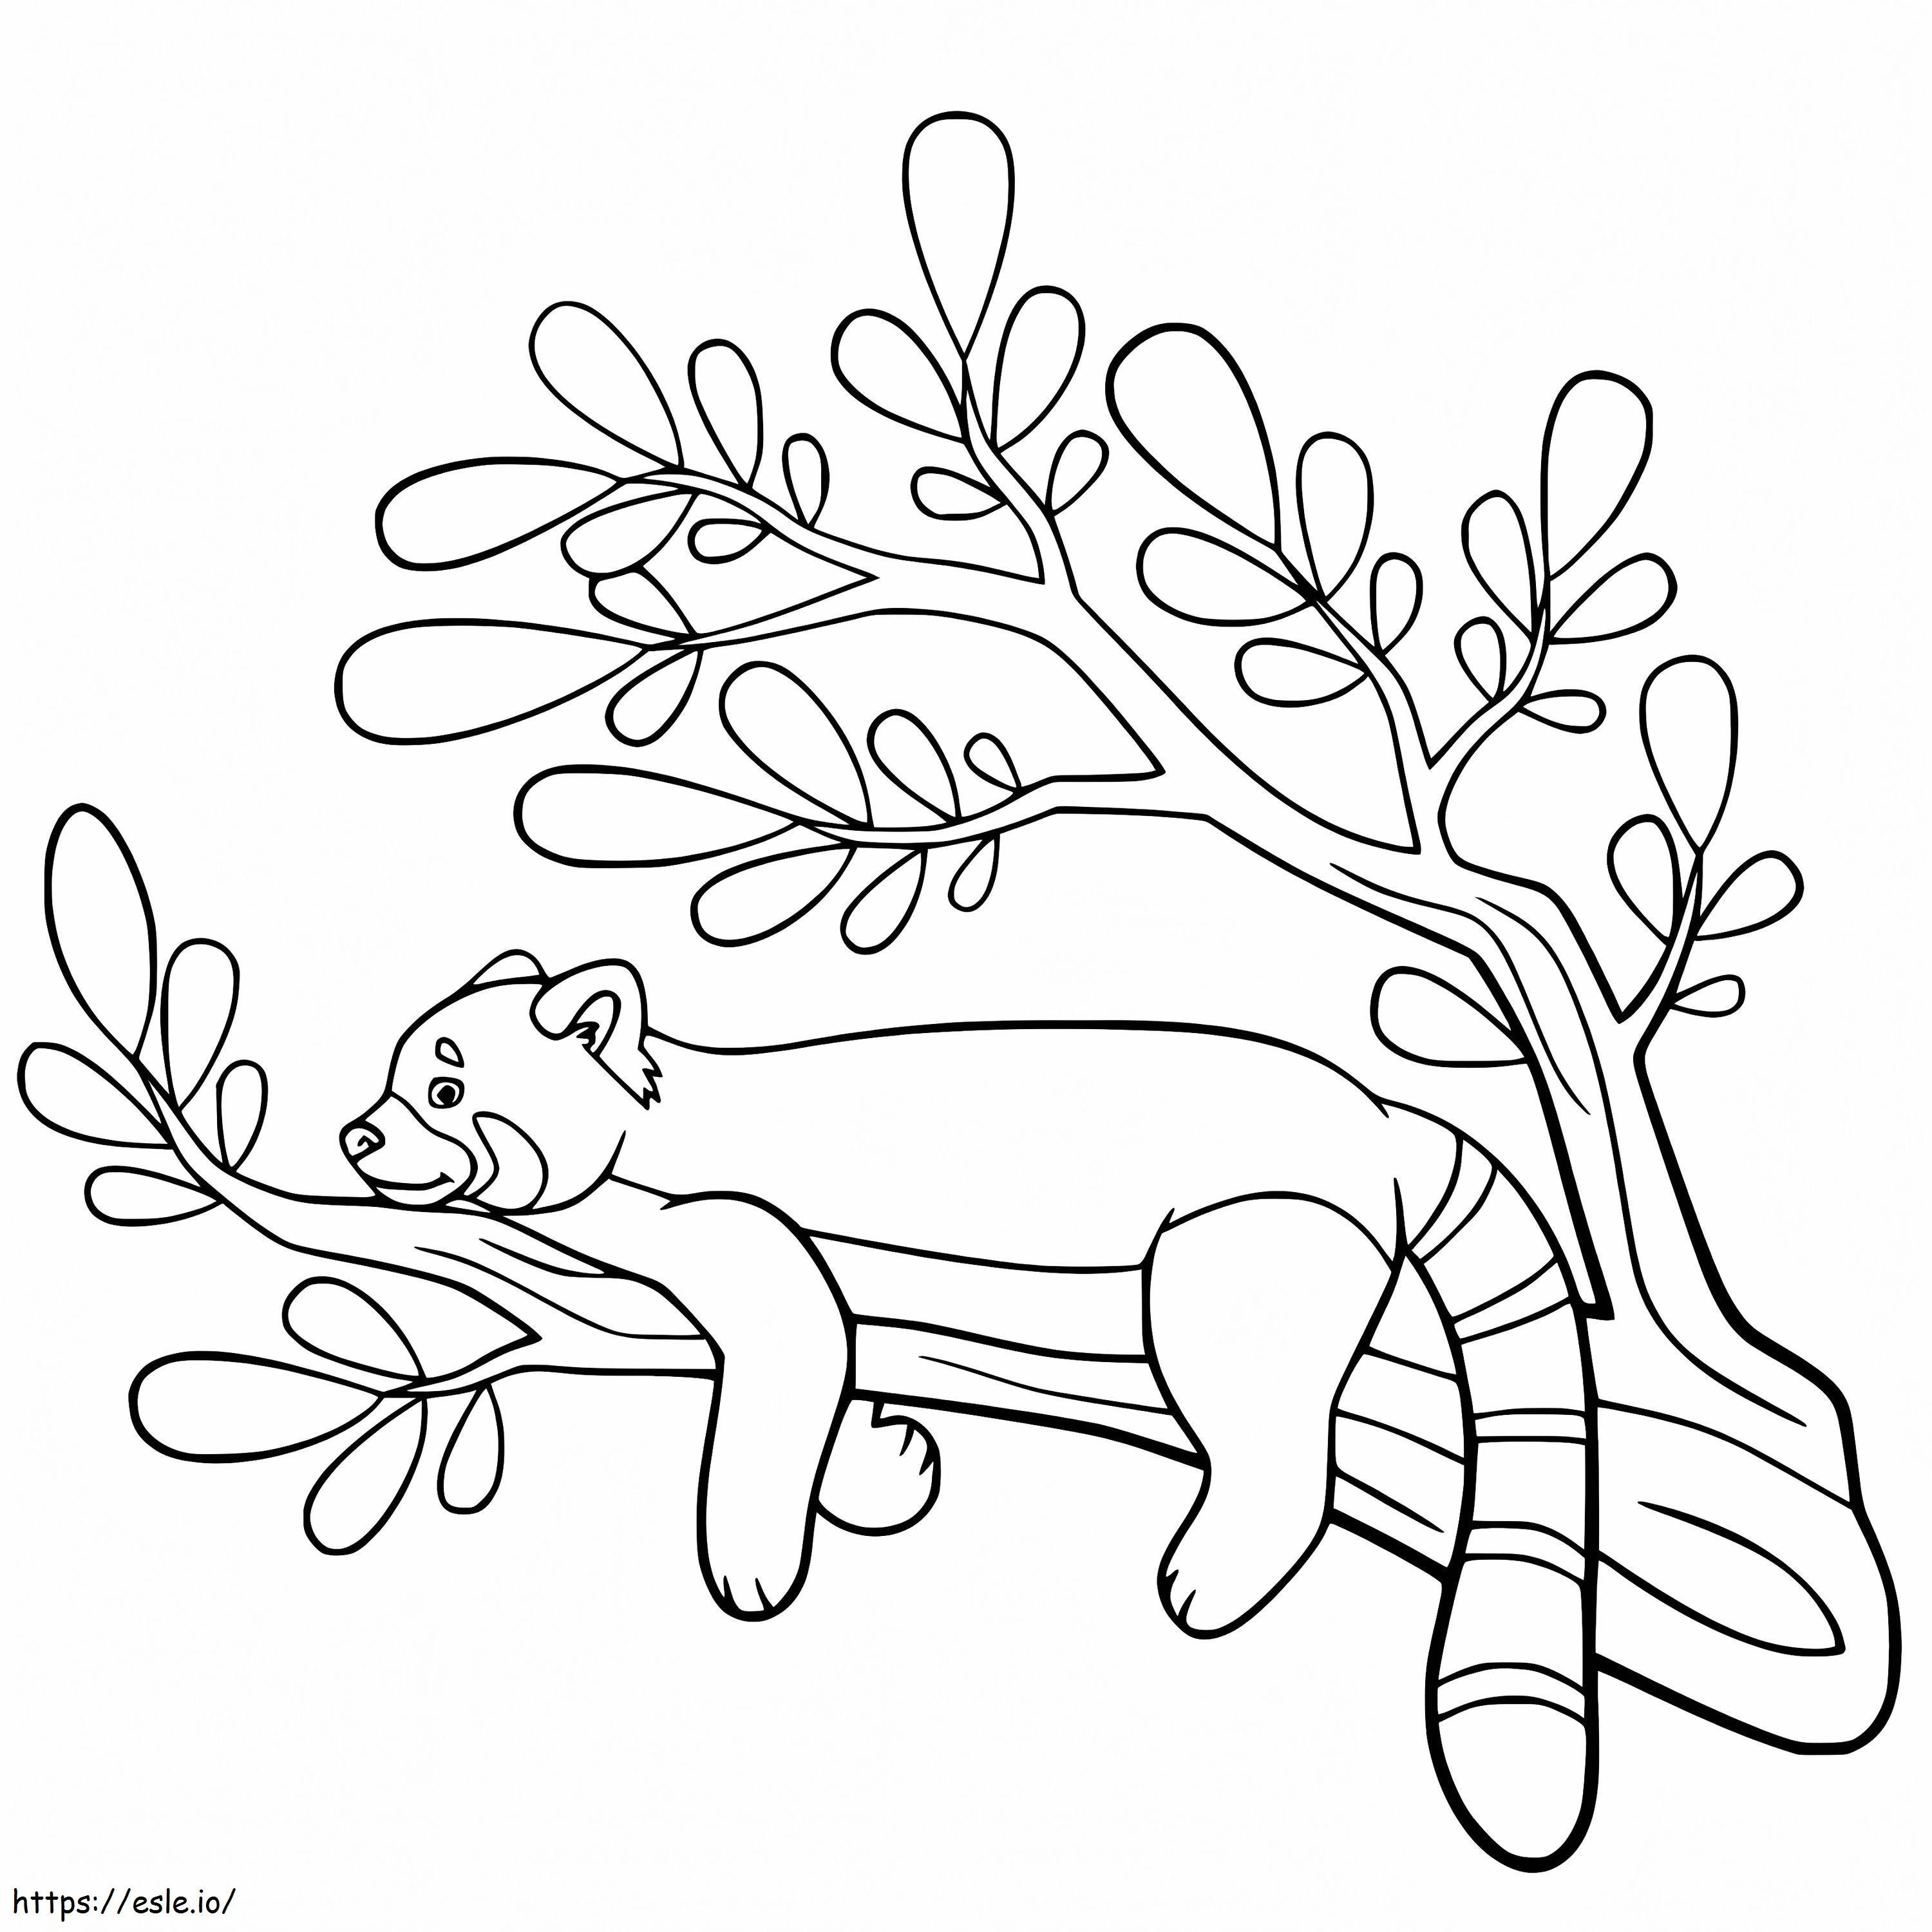 Lazy Red Panda coloring page